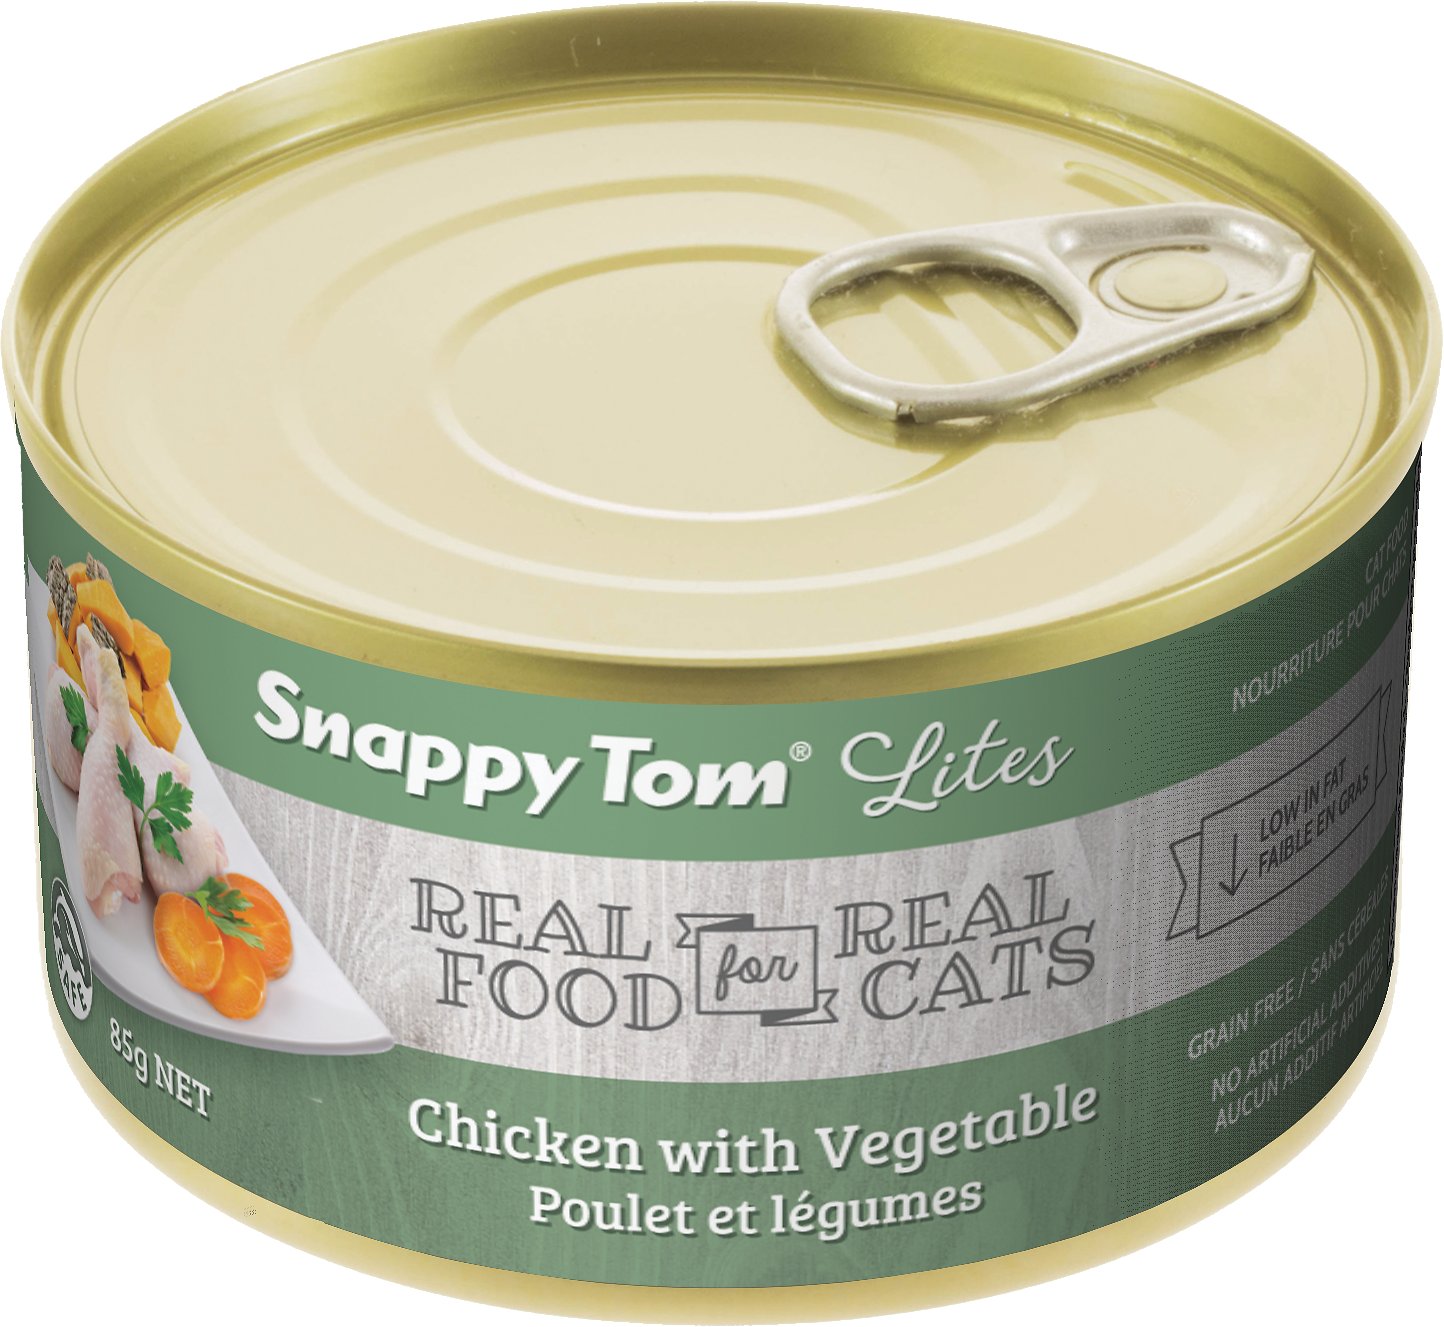 Snappy Tom Lites - Chicken With Vegetable